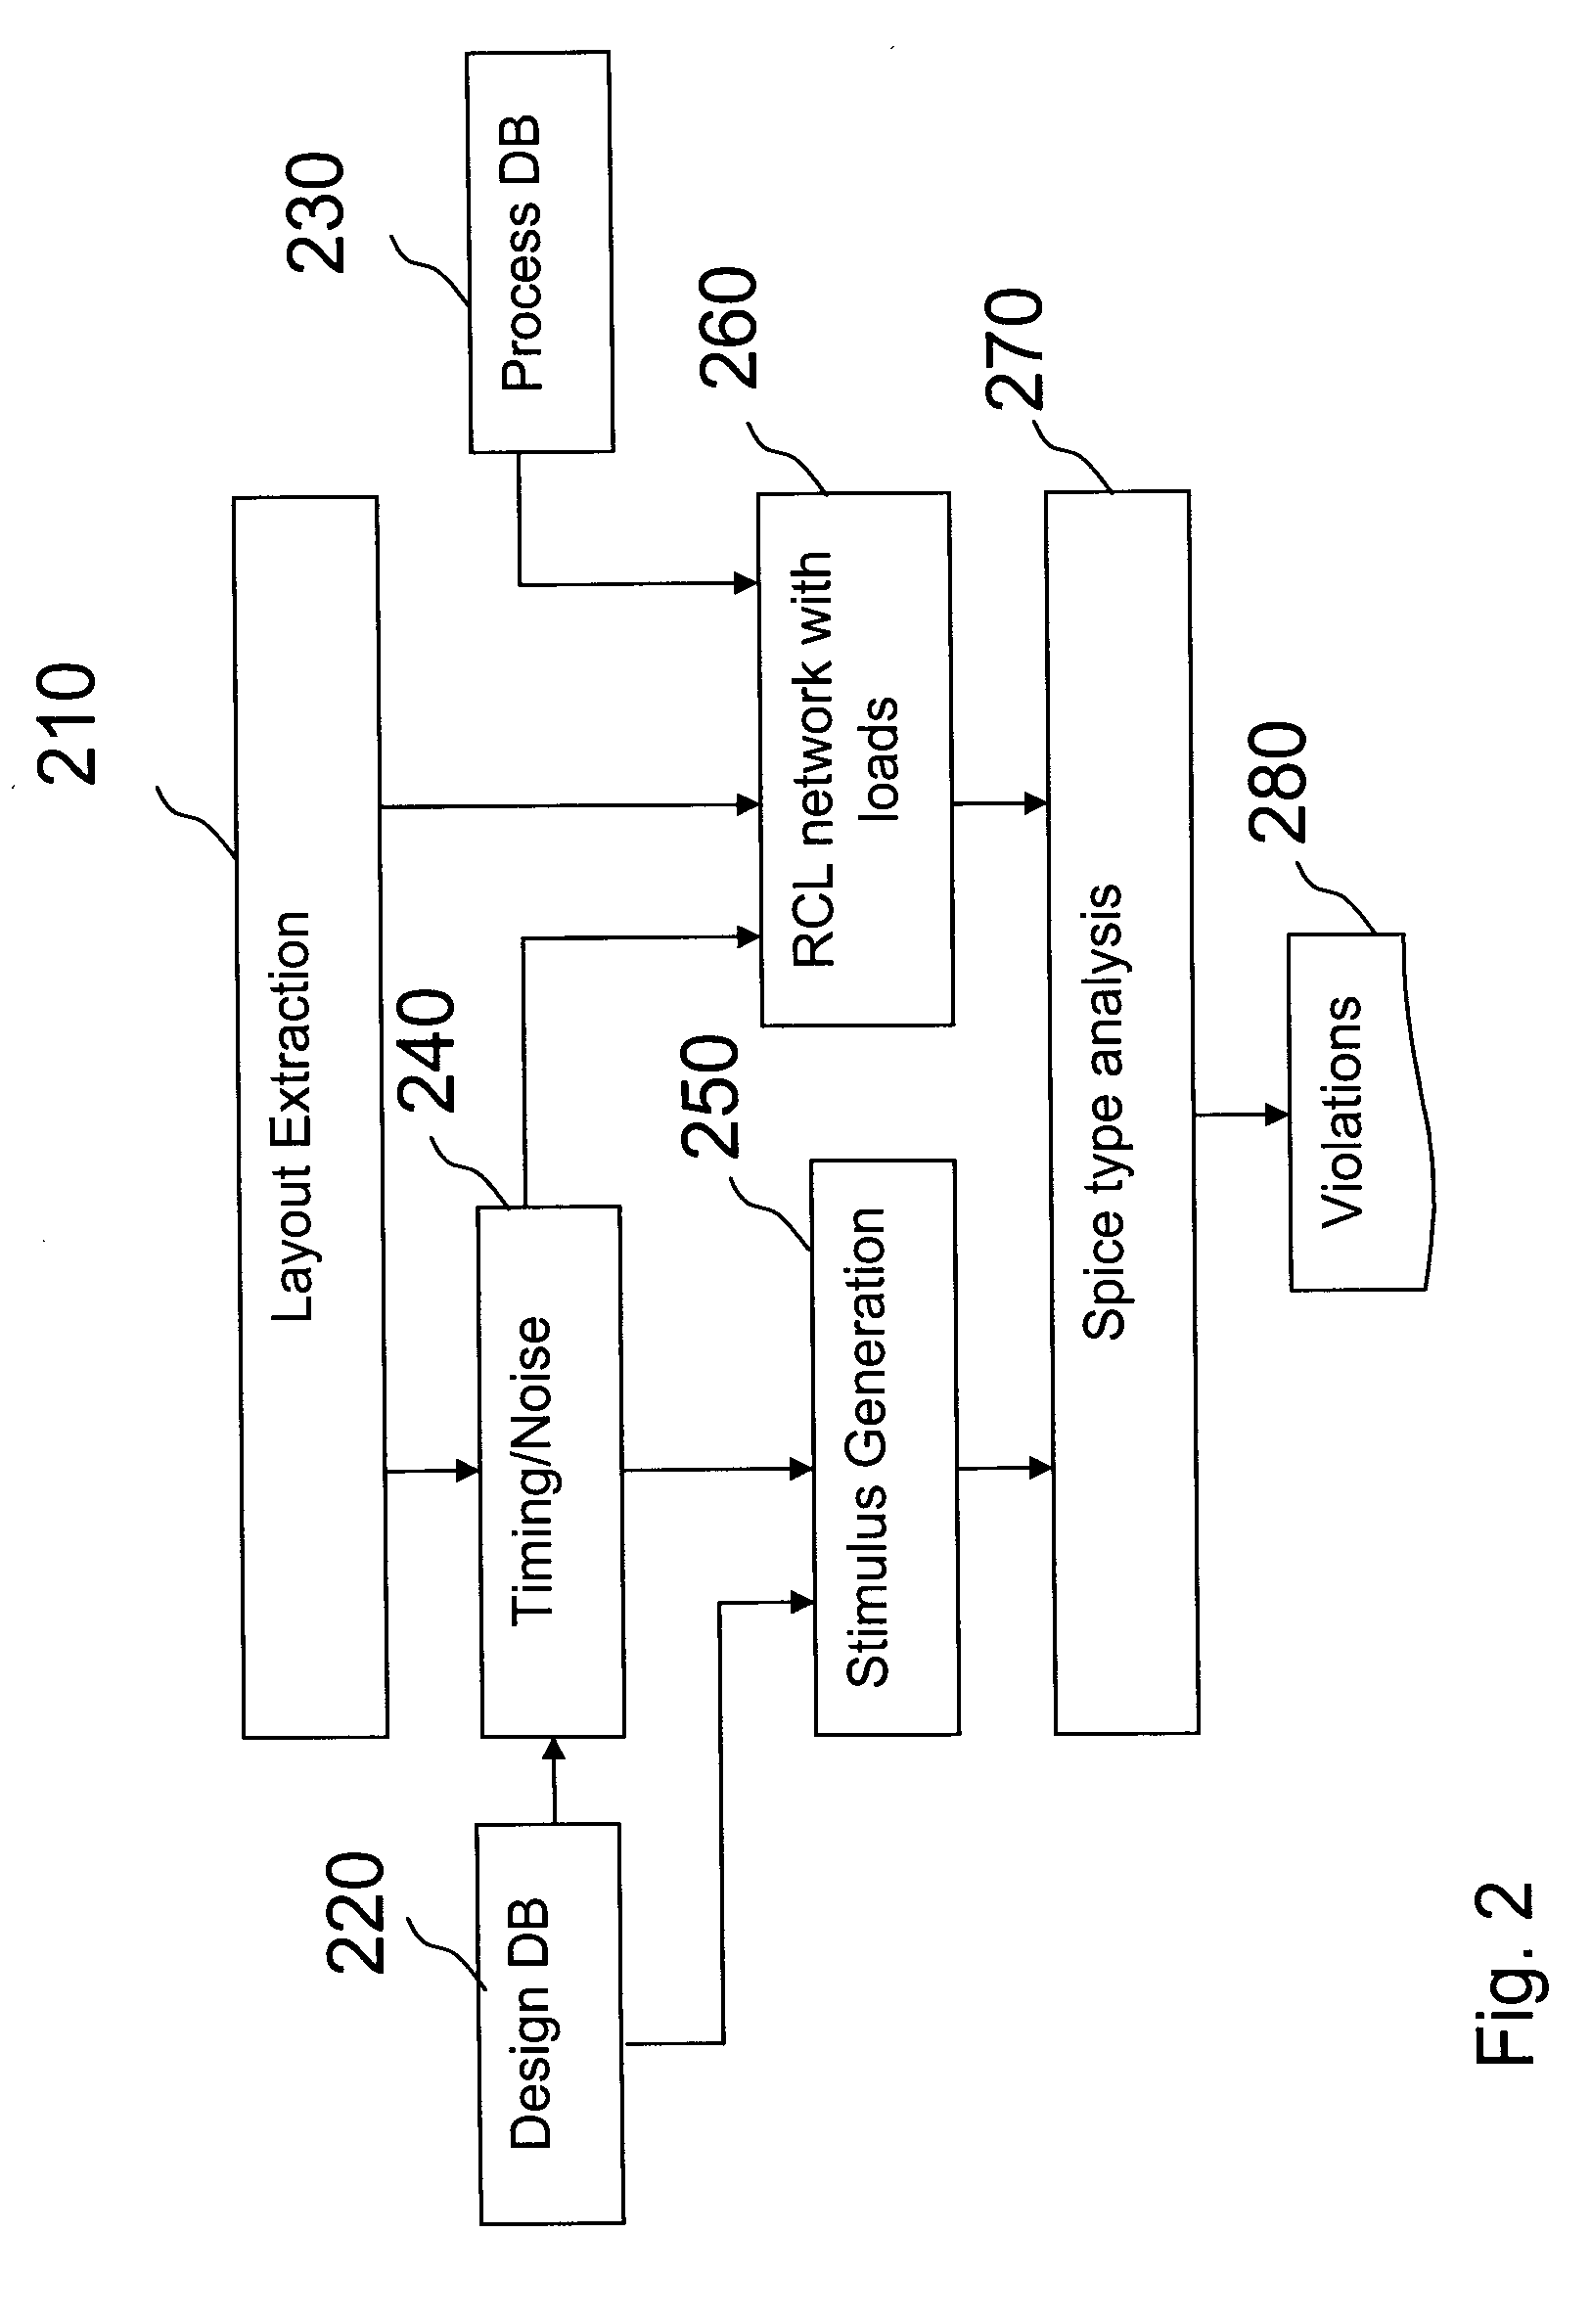 Method and System for Electromigration Analysis on Signal Wiring